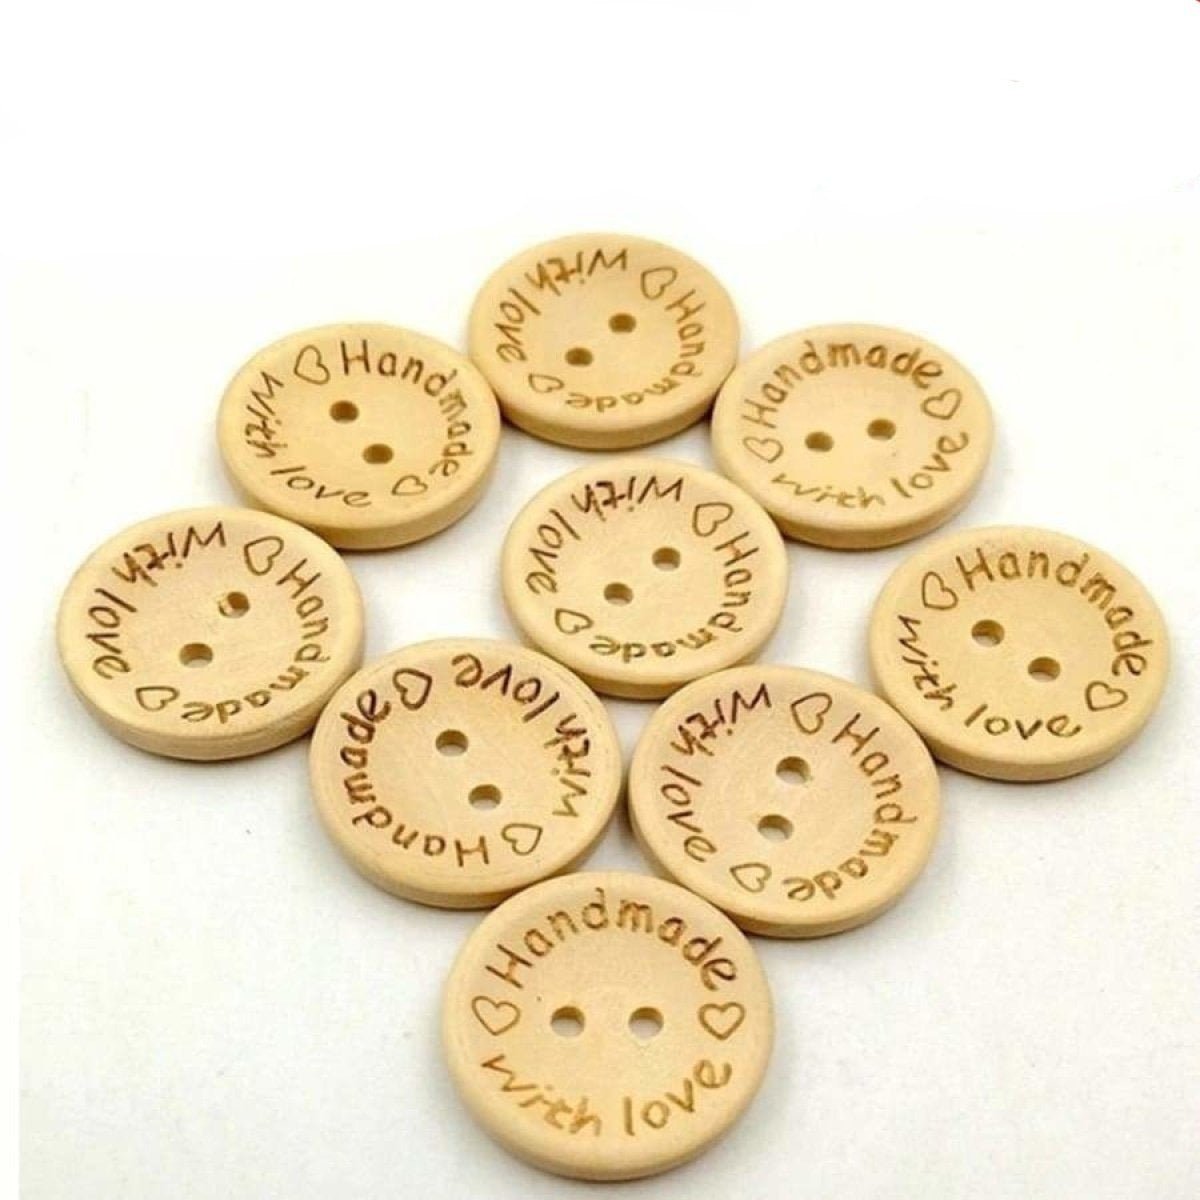 25x 25mm "Handmade with Love" Round Wooden Buttons Handmade Clothes - Asia Sell